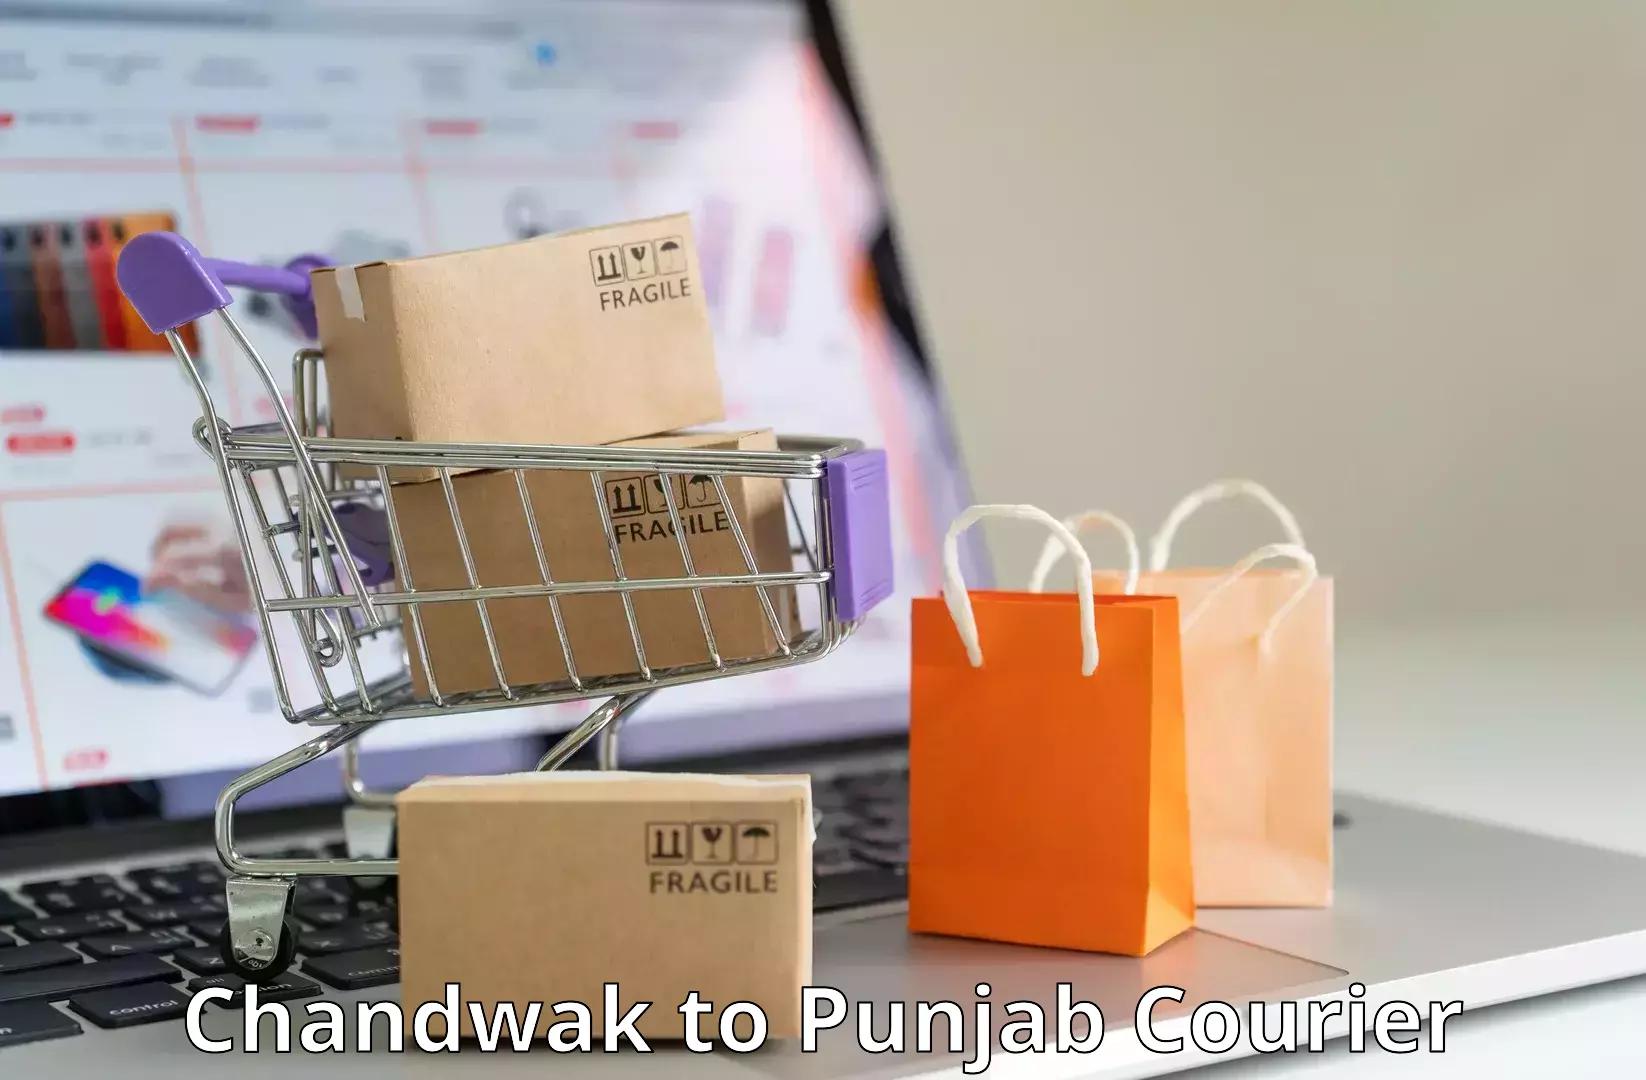 Round-the-clock parcel delivery Chandwak to Talwandi Sabo